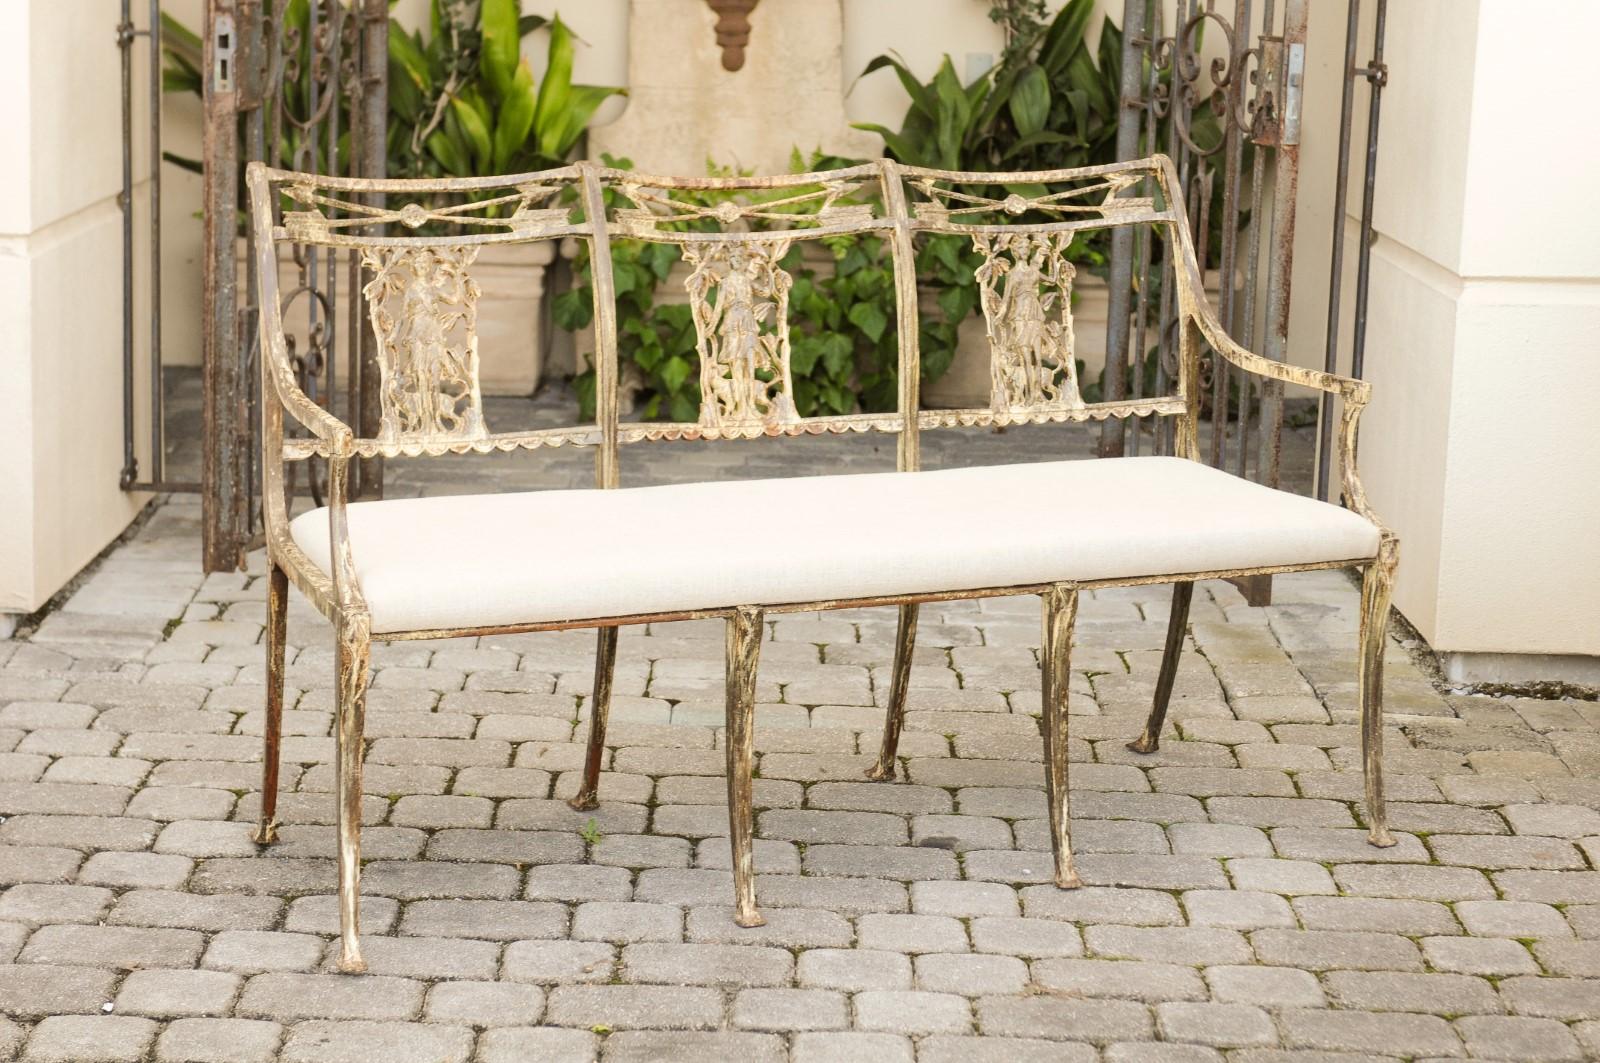 Vintage Wrought-Iron Diana the Huntress Pattern Garden Bench with Upholstery For Sale 5